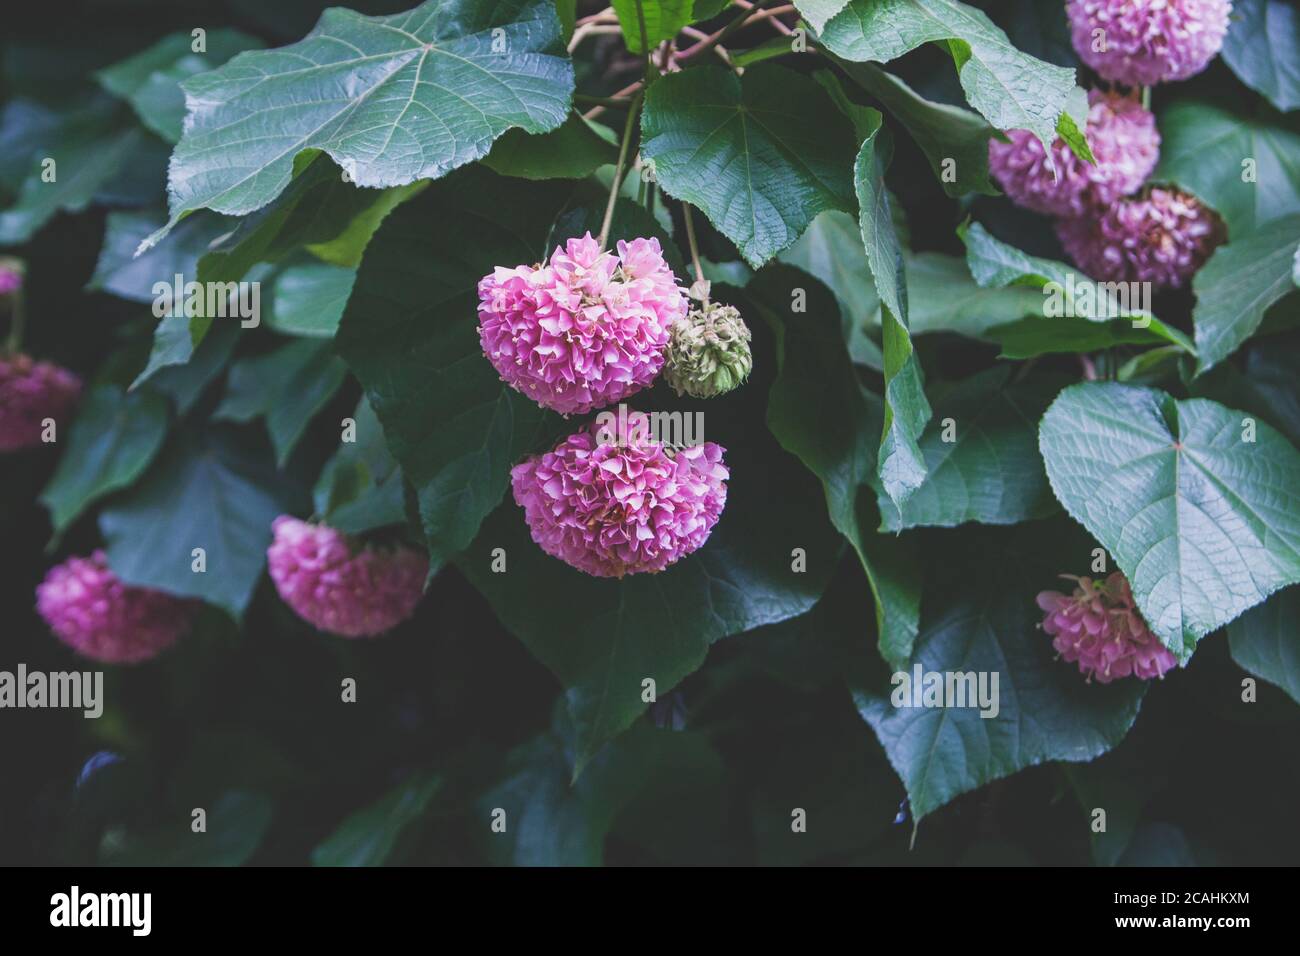 Soft focus of pink dombeya flowers surround with green leaves at a garden Stock Photo